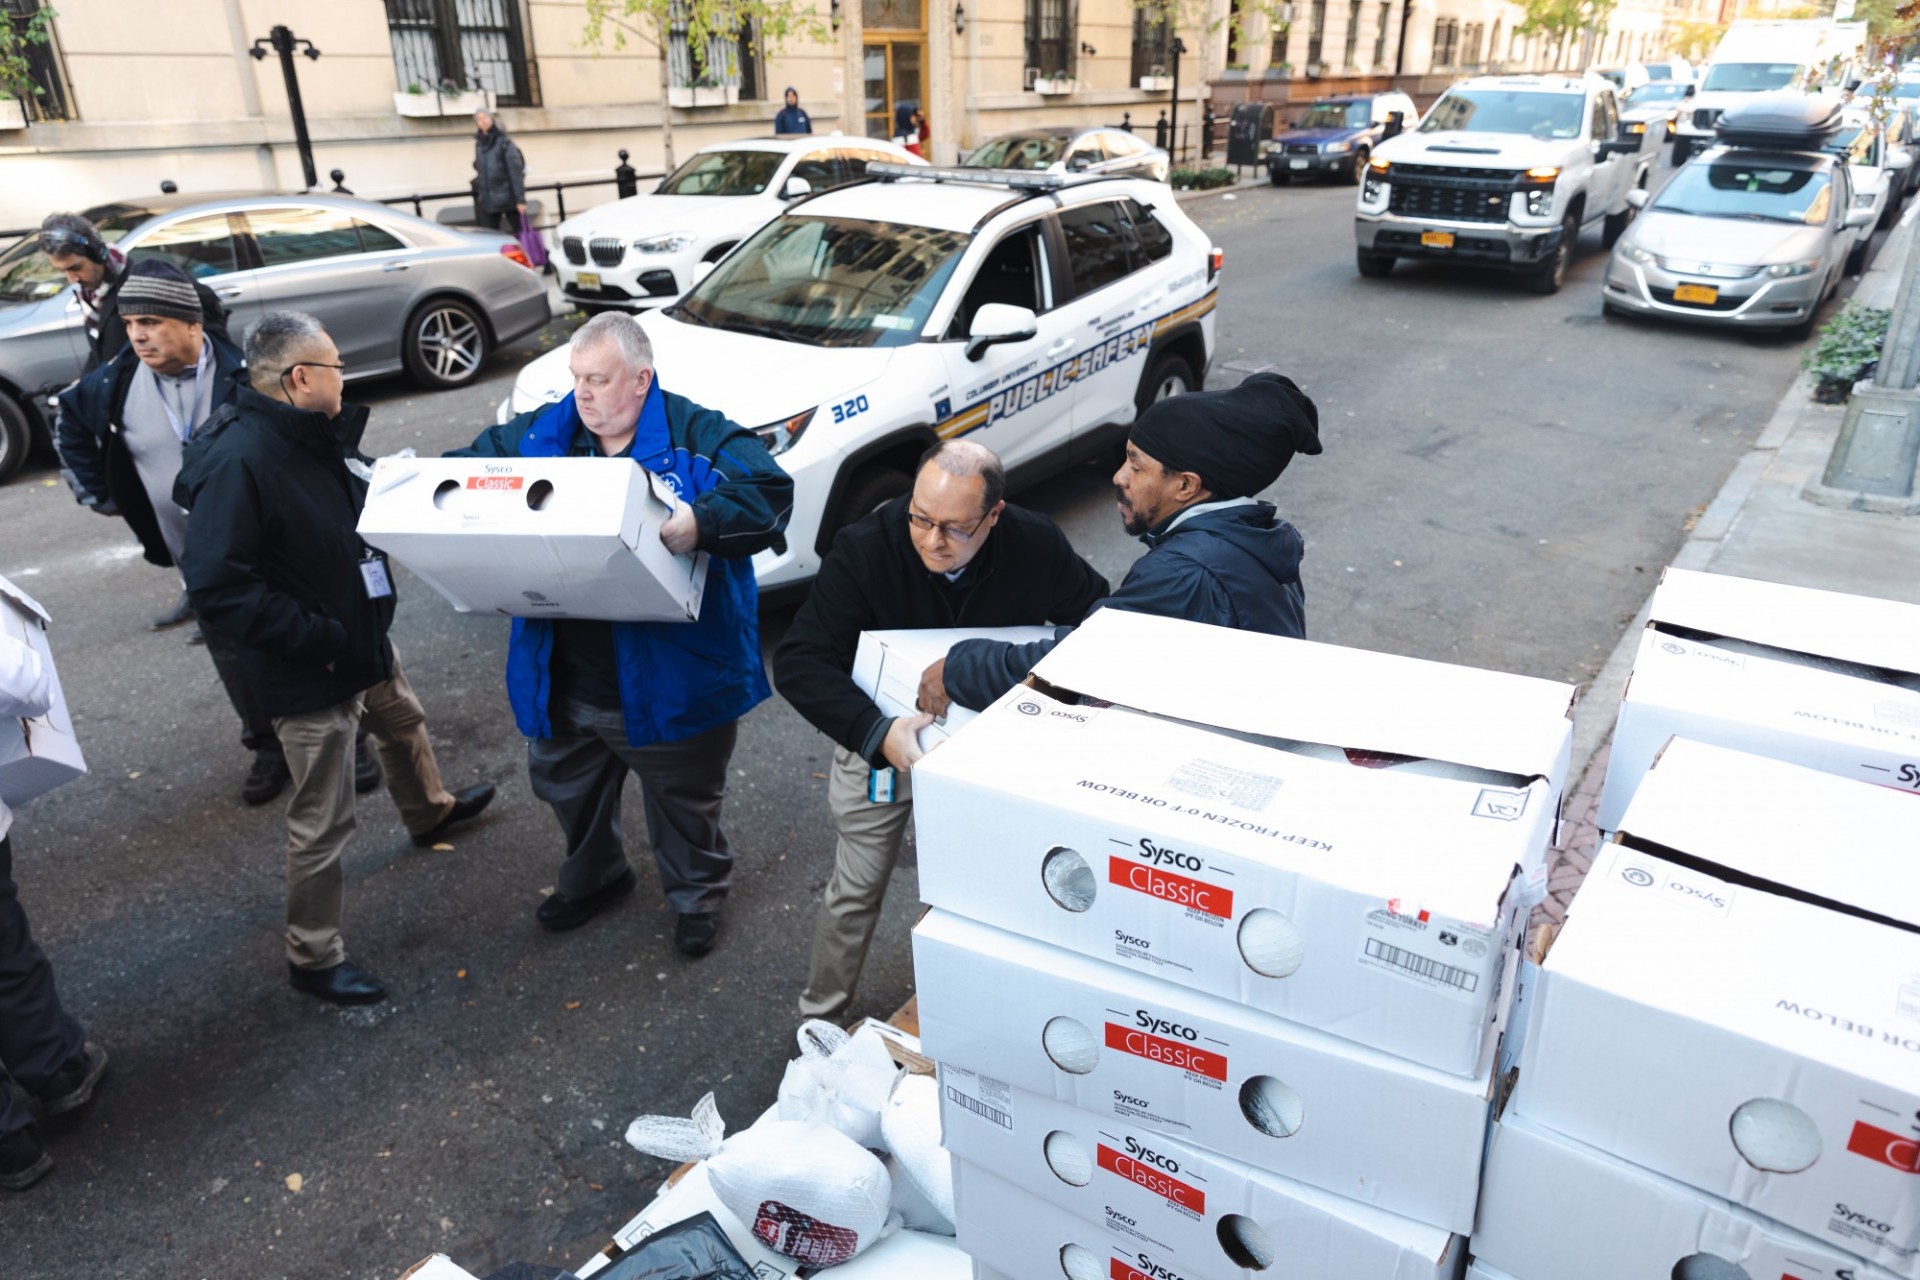 Dining and Public Safety employees loading turkeys for delivery.